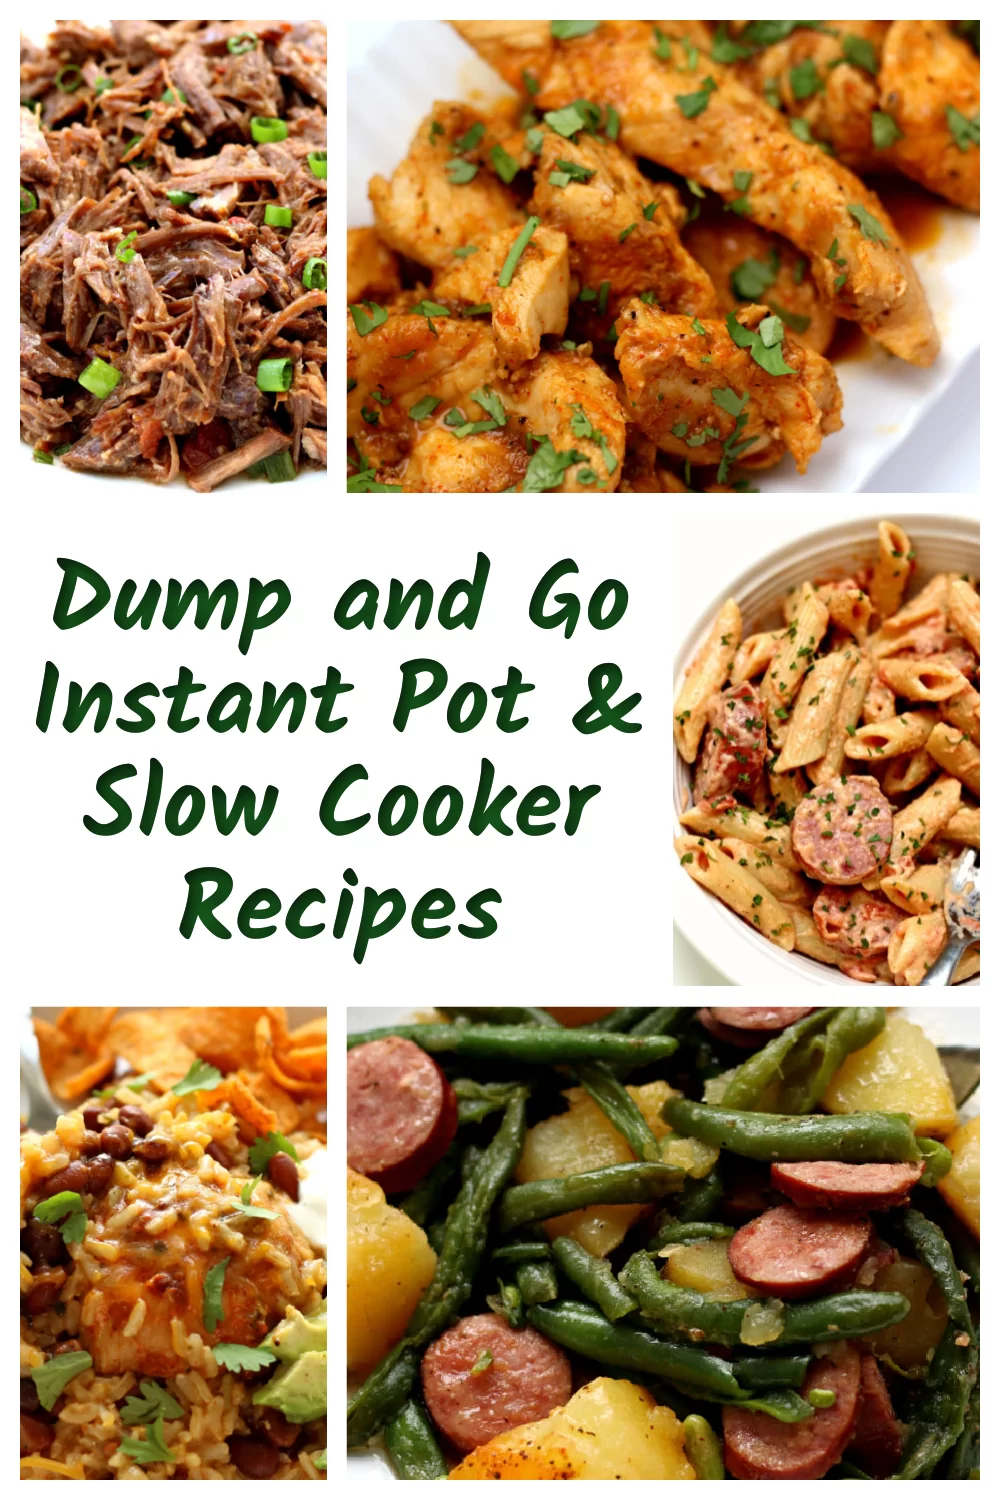 65 Dump and Go Instant Pot and Slow Cooker Recipes - 365 Days of